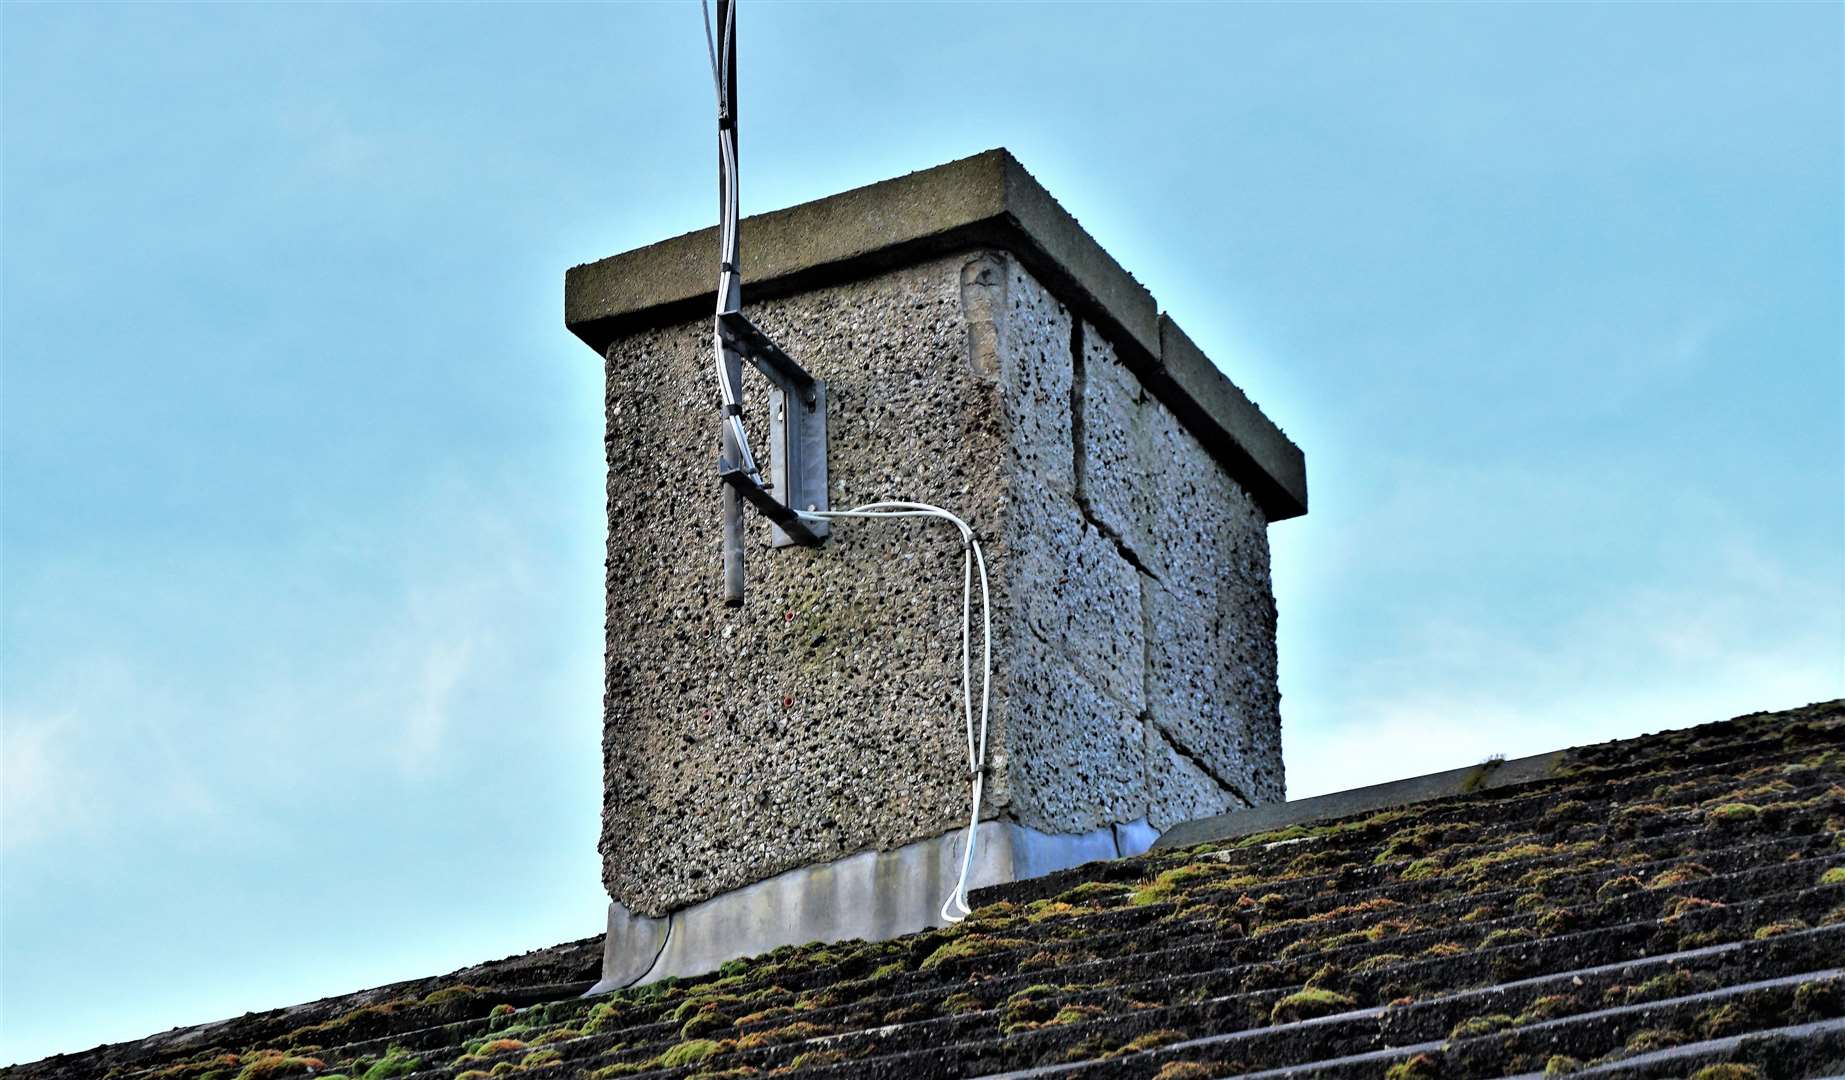 The tenants claim to have contacted the council about the cracked chimney but say they were ignored. Picture: DGS